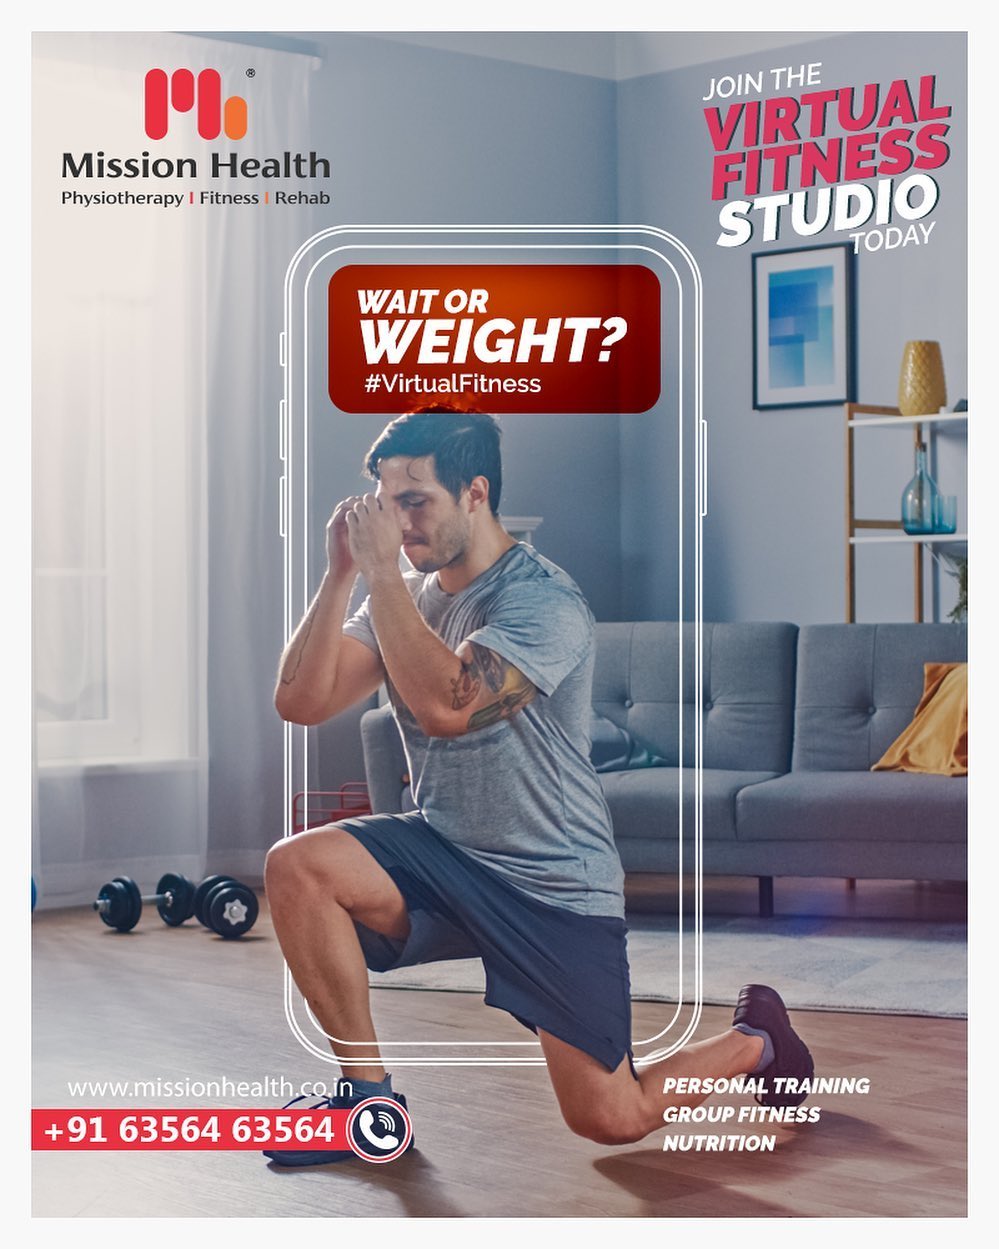 Make yourself stronger than your excuses... Don't wait now, Join the Virtual Fitness studio today@ Mission Health ... Personal Training/Group Fitness/Diet Plan available online... Call: +916356463564
Visit: www.missionhealth.co.in

#virtualfitnessstudio #fitnessstudio #virtualfitnesss #befit #gymoffers #fitnessoffers #silmmingpackages #weightmanagement #weightreductionoffers #weightreduction #inchloss #inchlossoffers #inchlossworkouts #goslim #MissionHealth #MissionHealthIndia #MovementIsLife #AbilityClinic